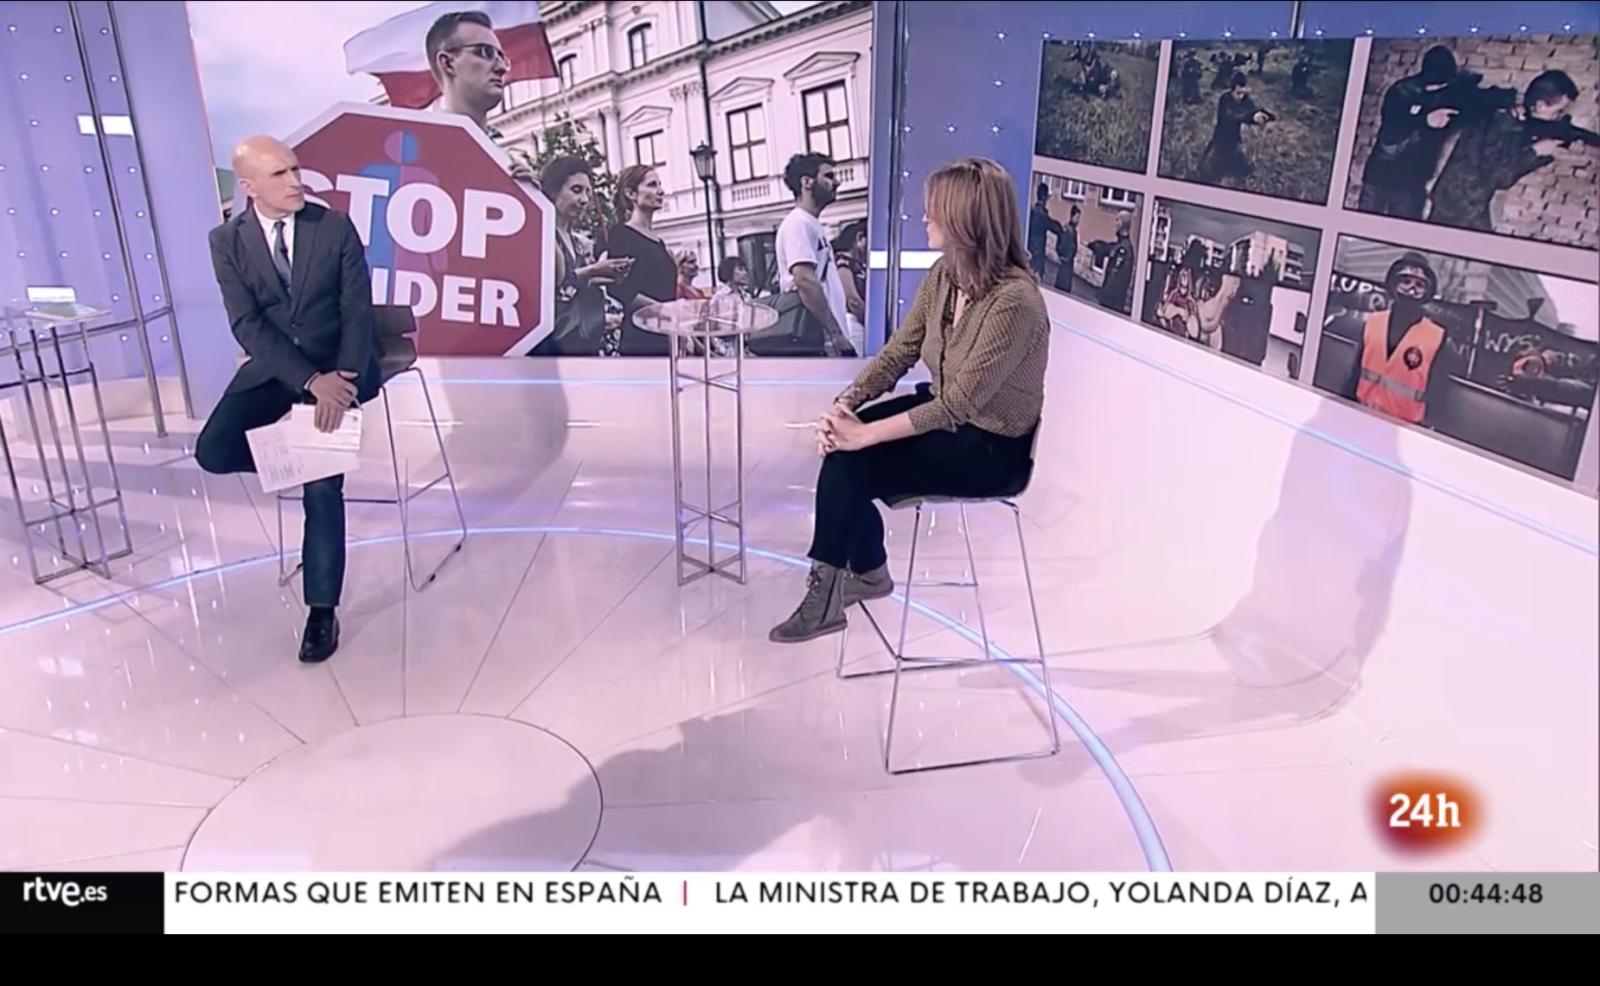 Speaking about my las exhibition in "La Hora cultural" Spanish television 24 horas